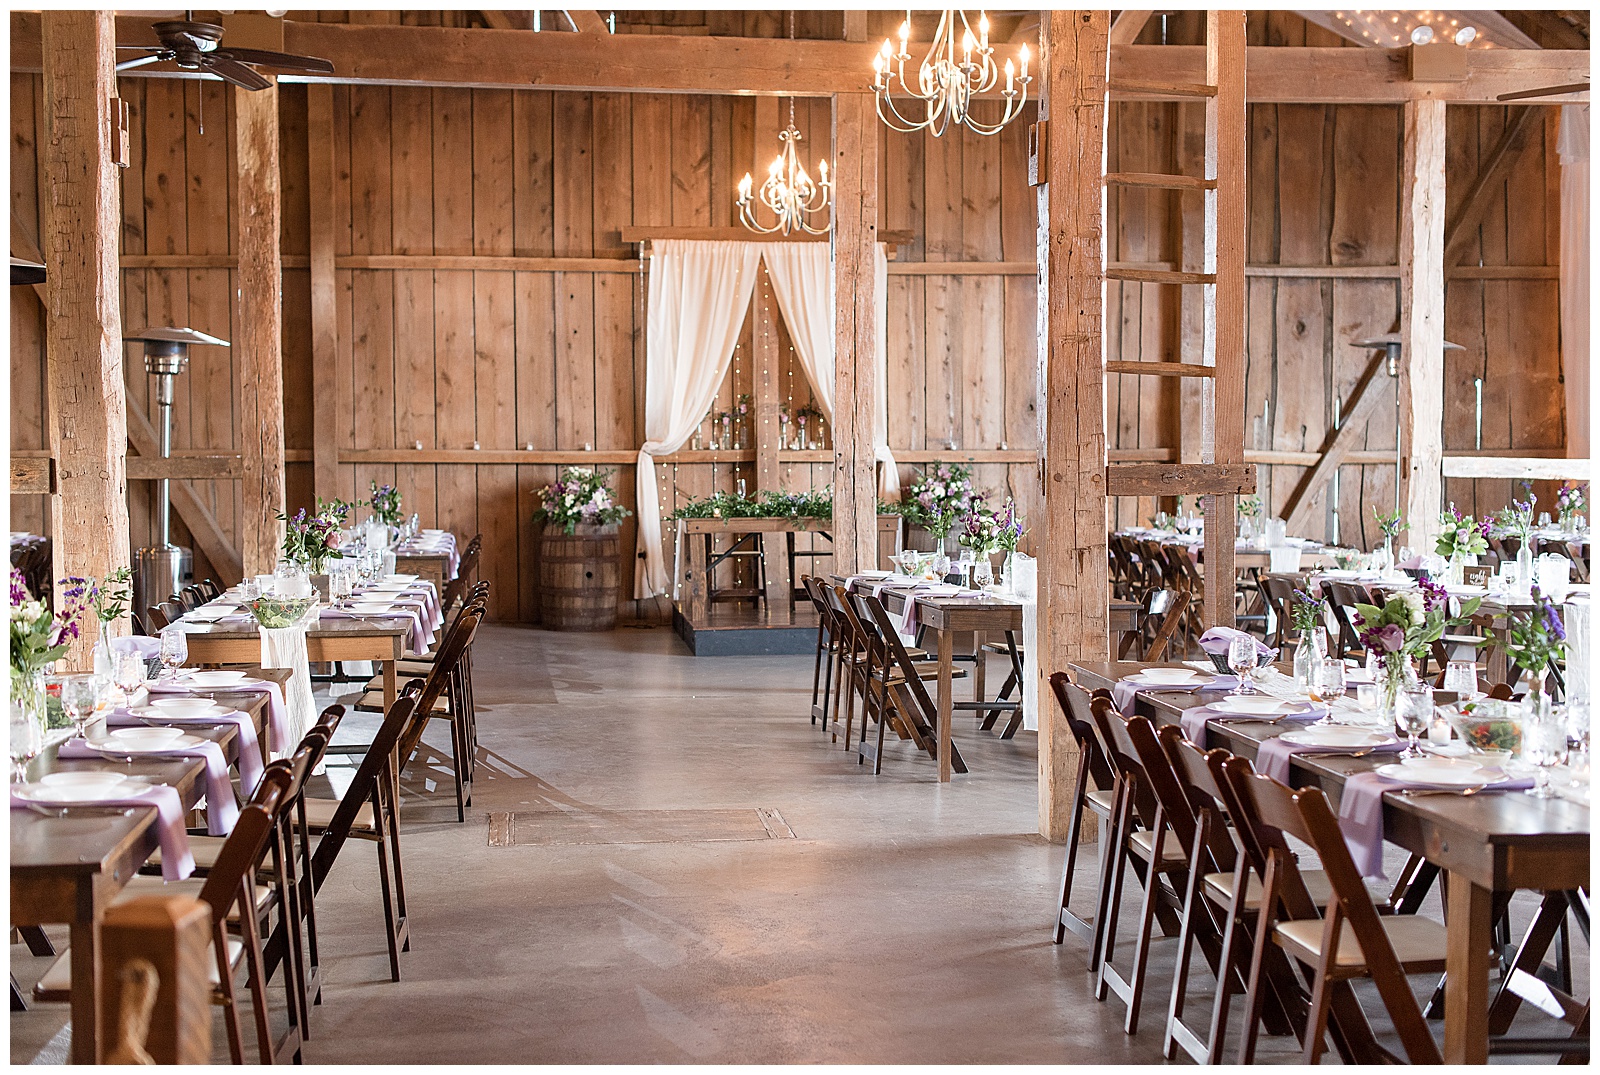 Best Barn Wedding Venues In Western Pa of all time Learn more here 